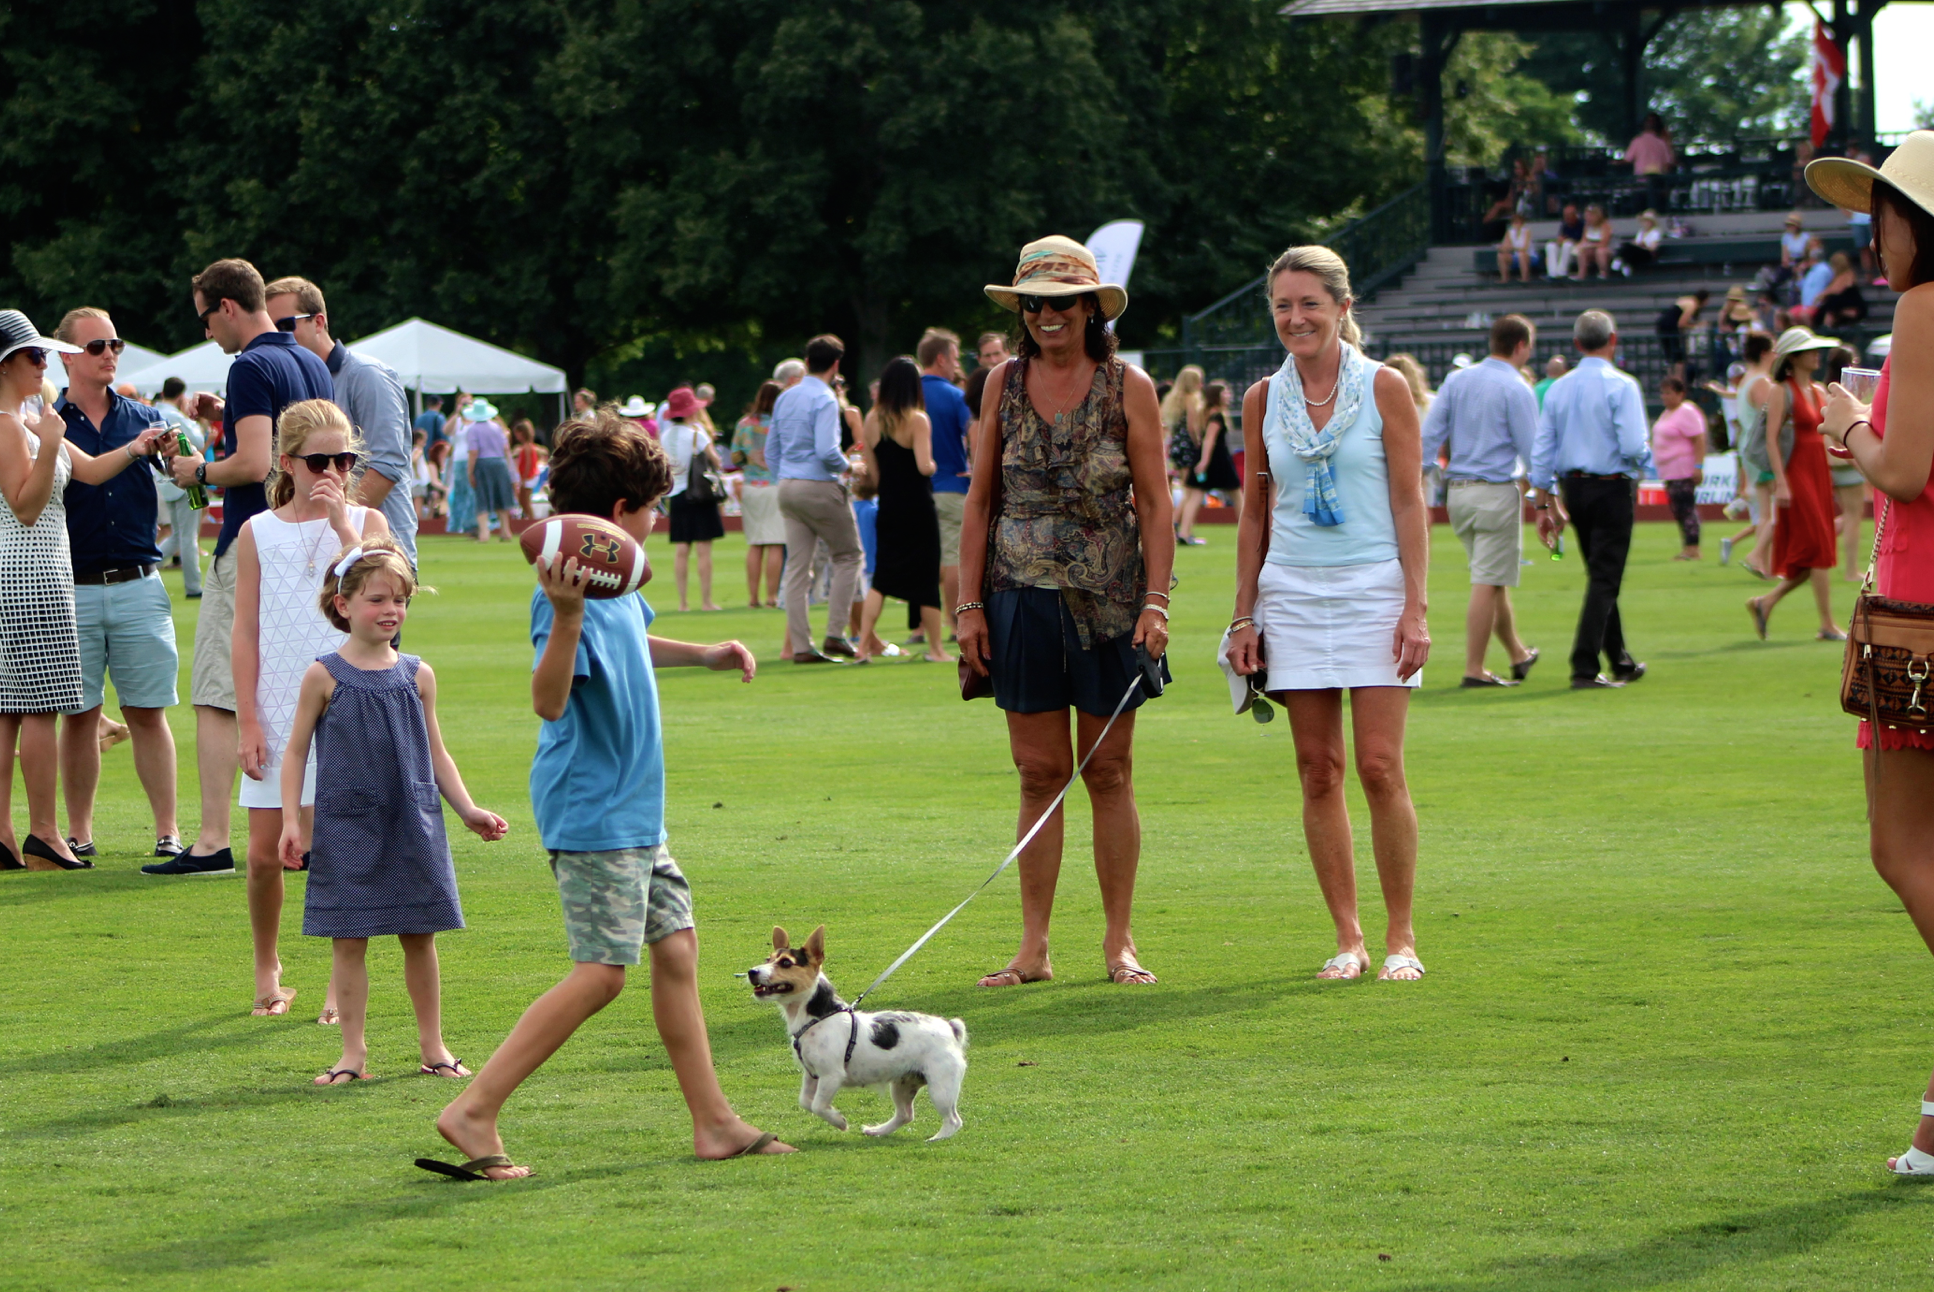 Divot stomping, frisbee and football tossing during intermission at Greenwich Polo Club during Day 1 of East Coast Open. Credit: Leslie Yager